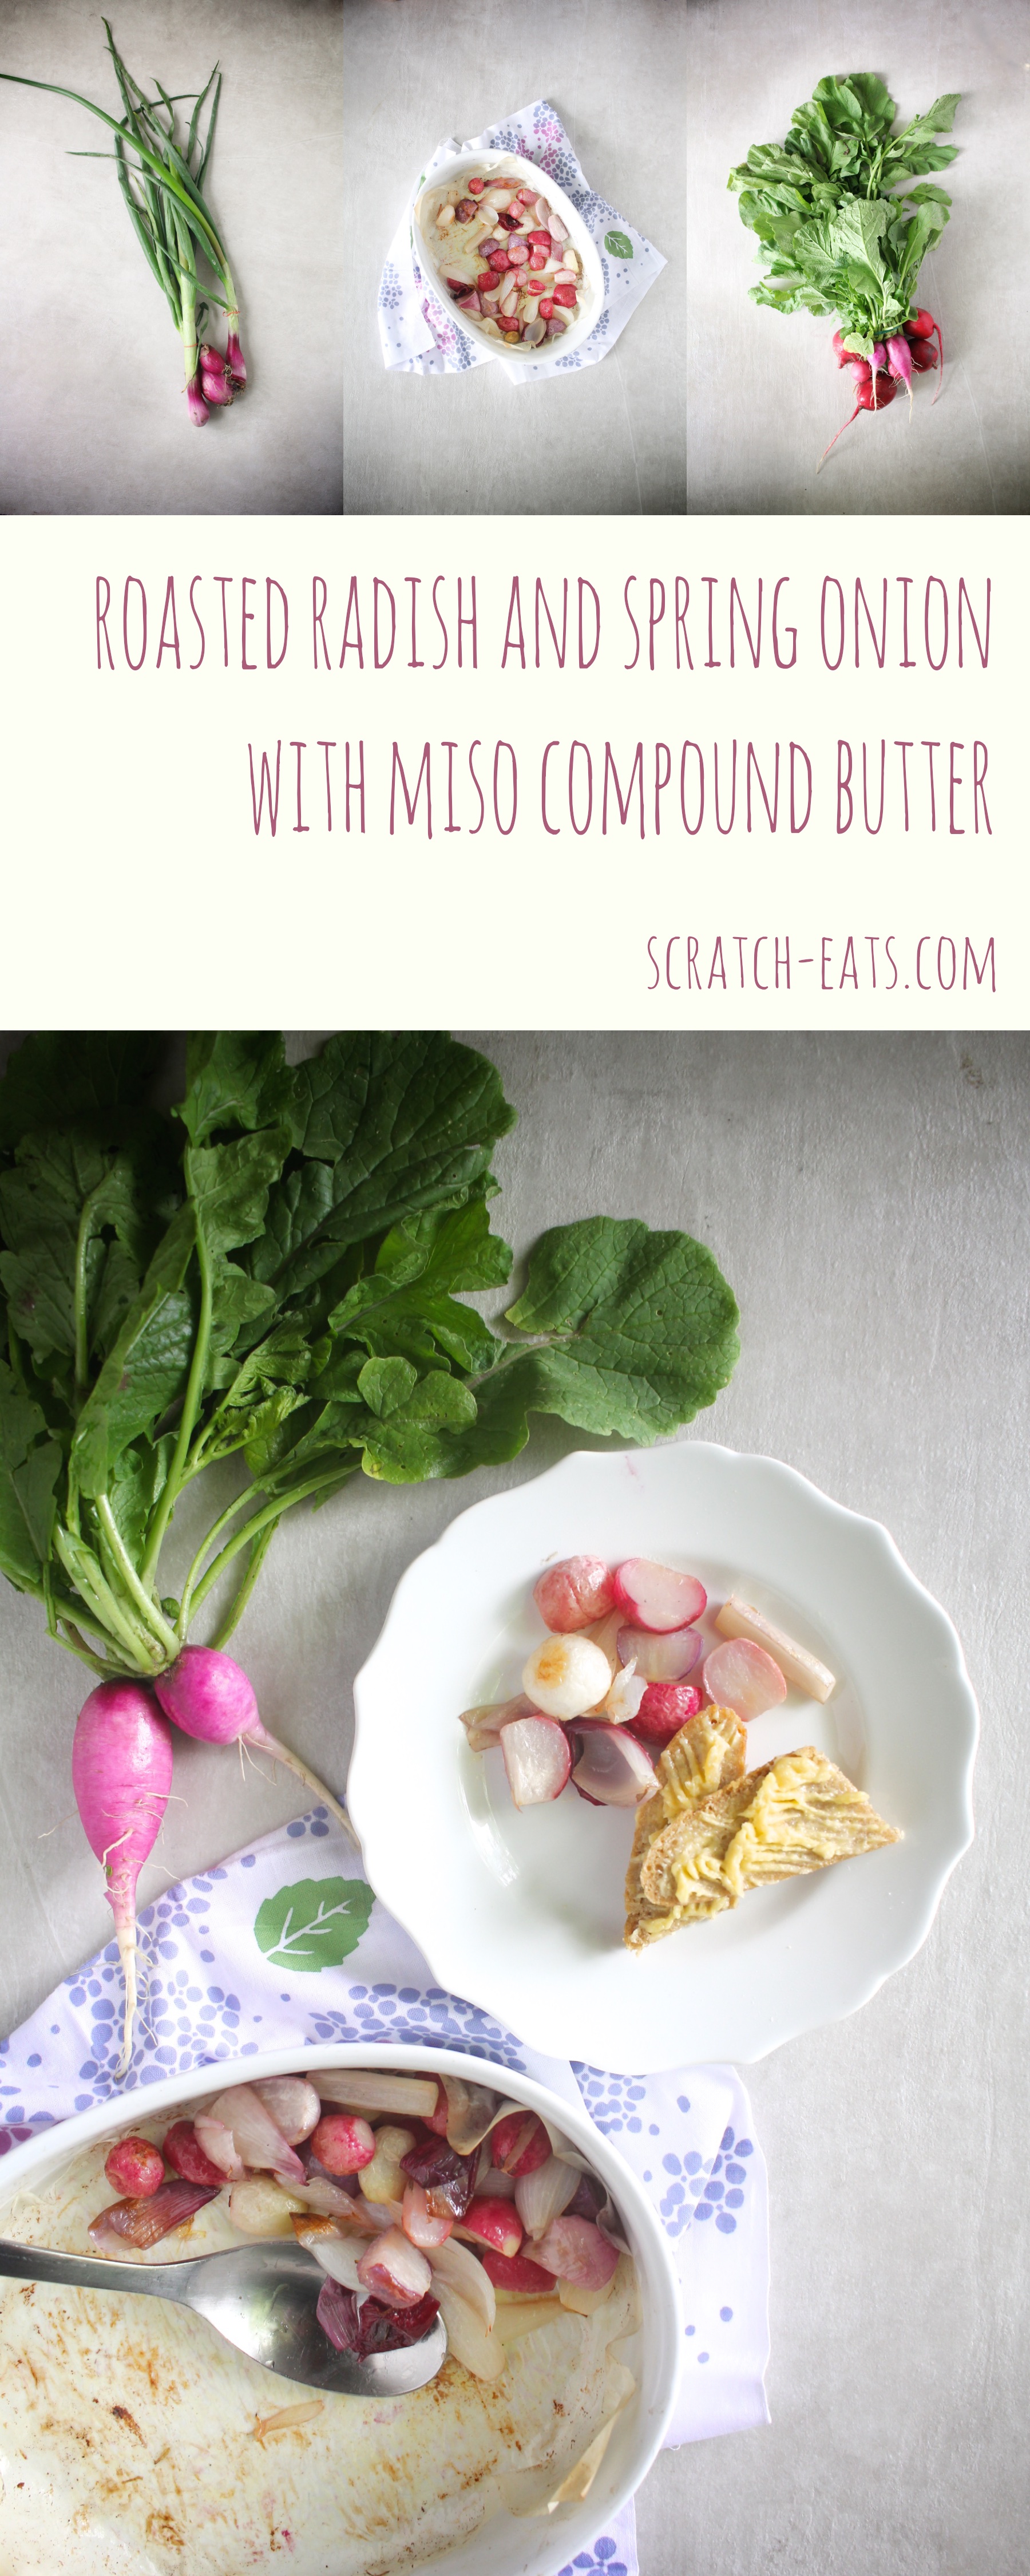 roasted radish and spring onion with miso compound butter